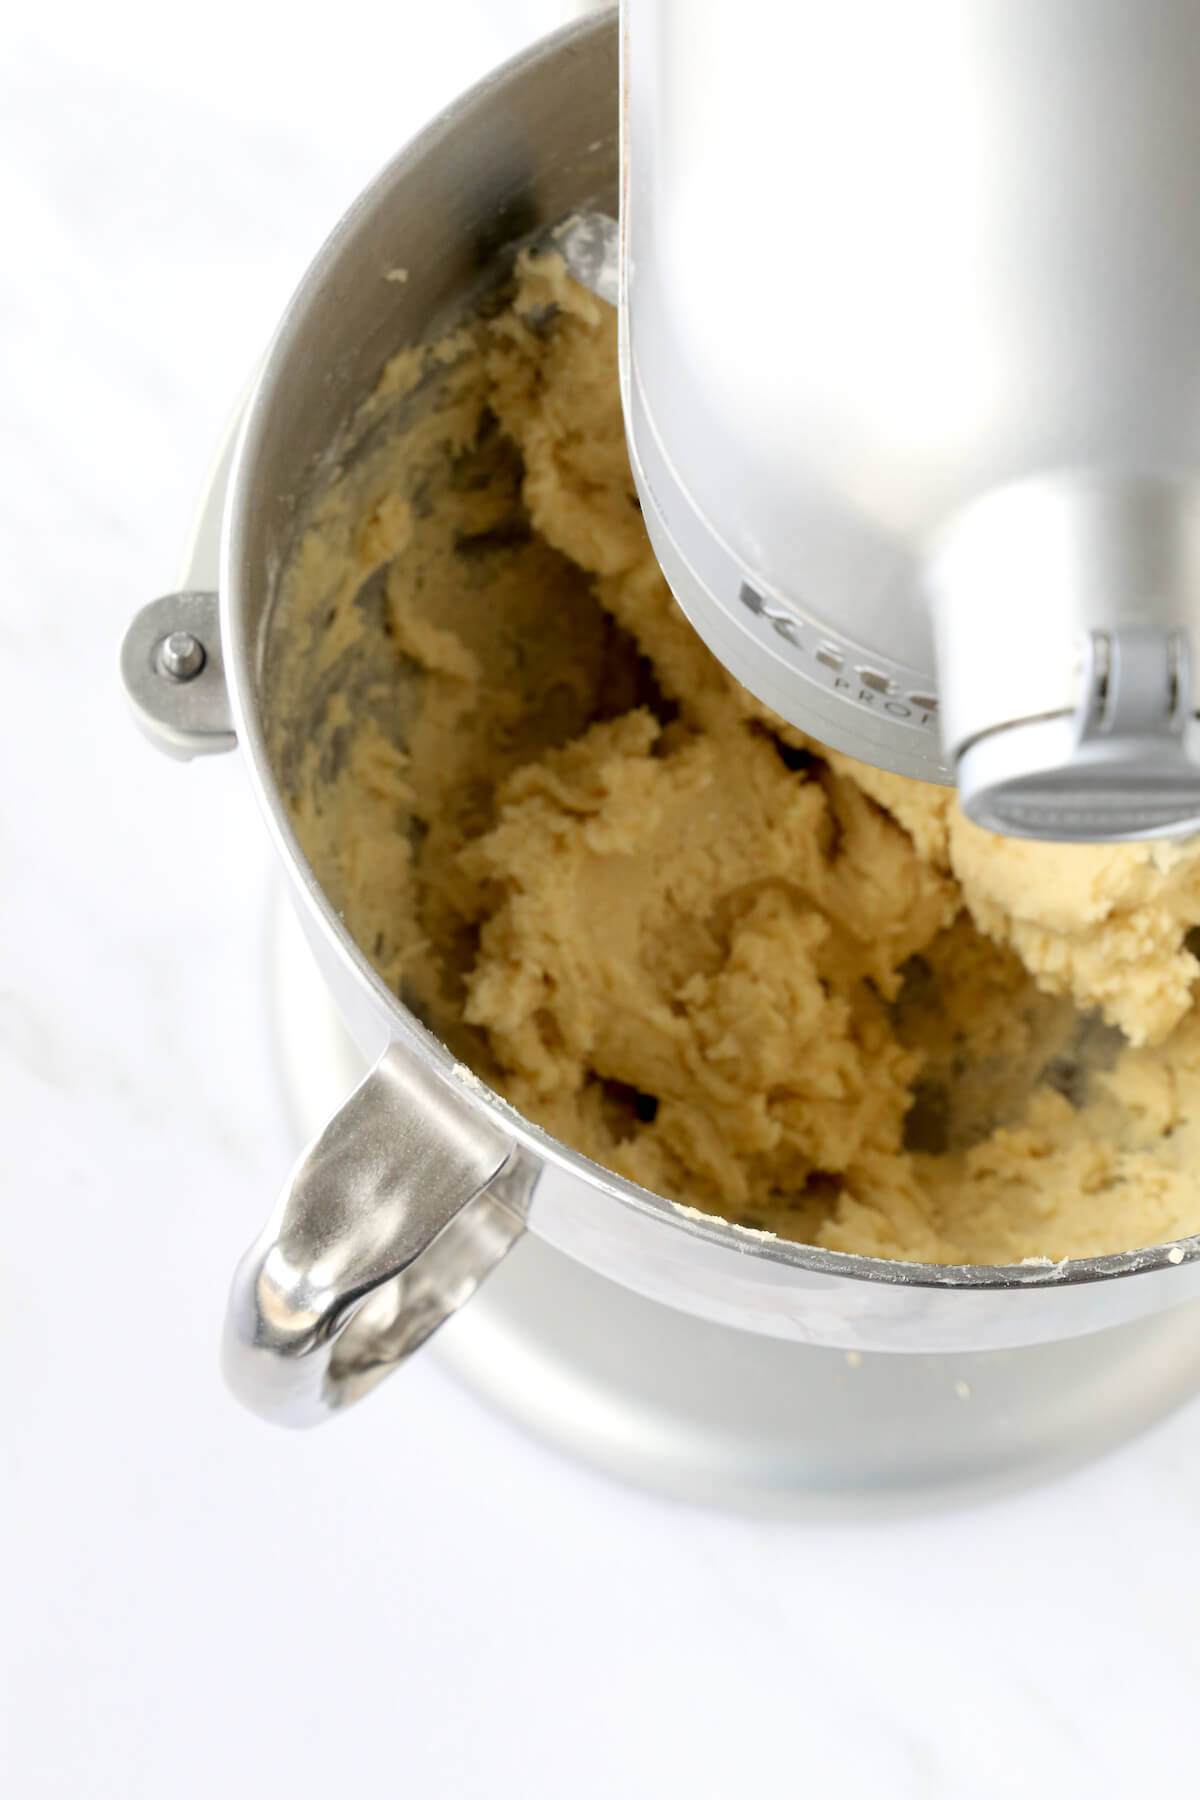 An electric mixer bowl filled with a cookie batter.